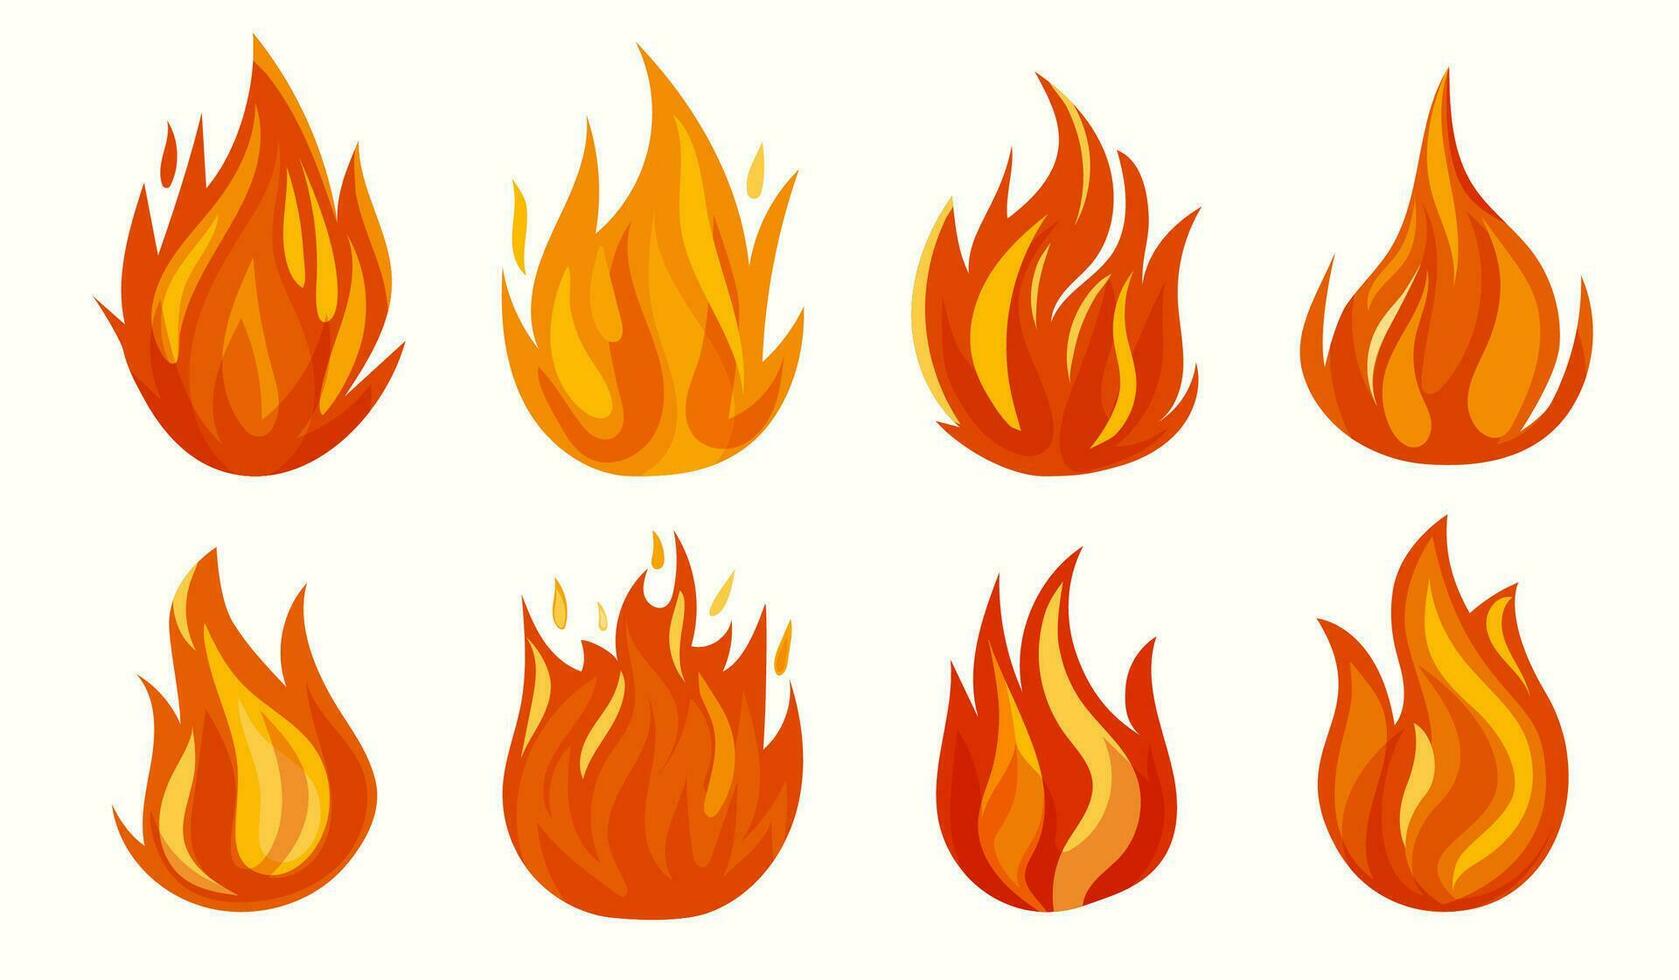 Warm orange fire flames with hot sparks set. Bonfire collection cartoon style. Flaming blaze icon vector